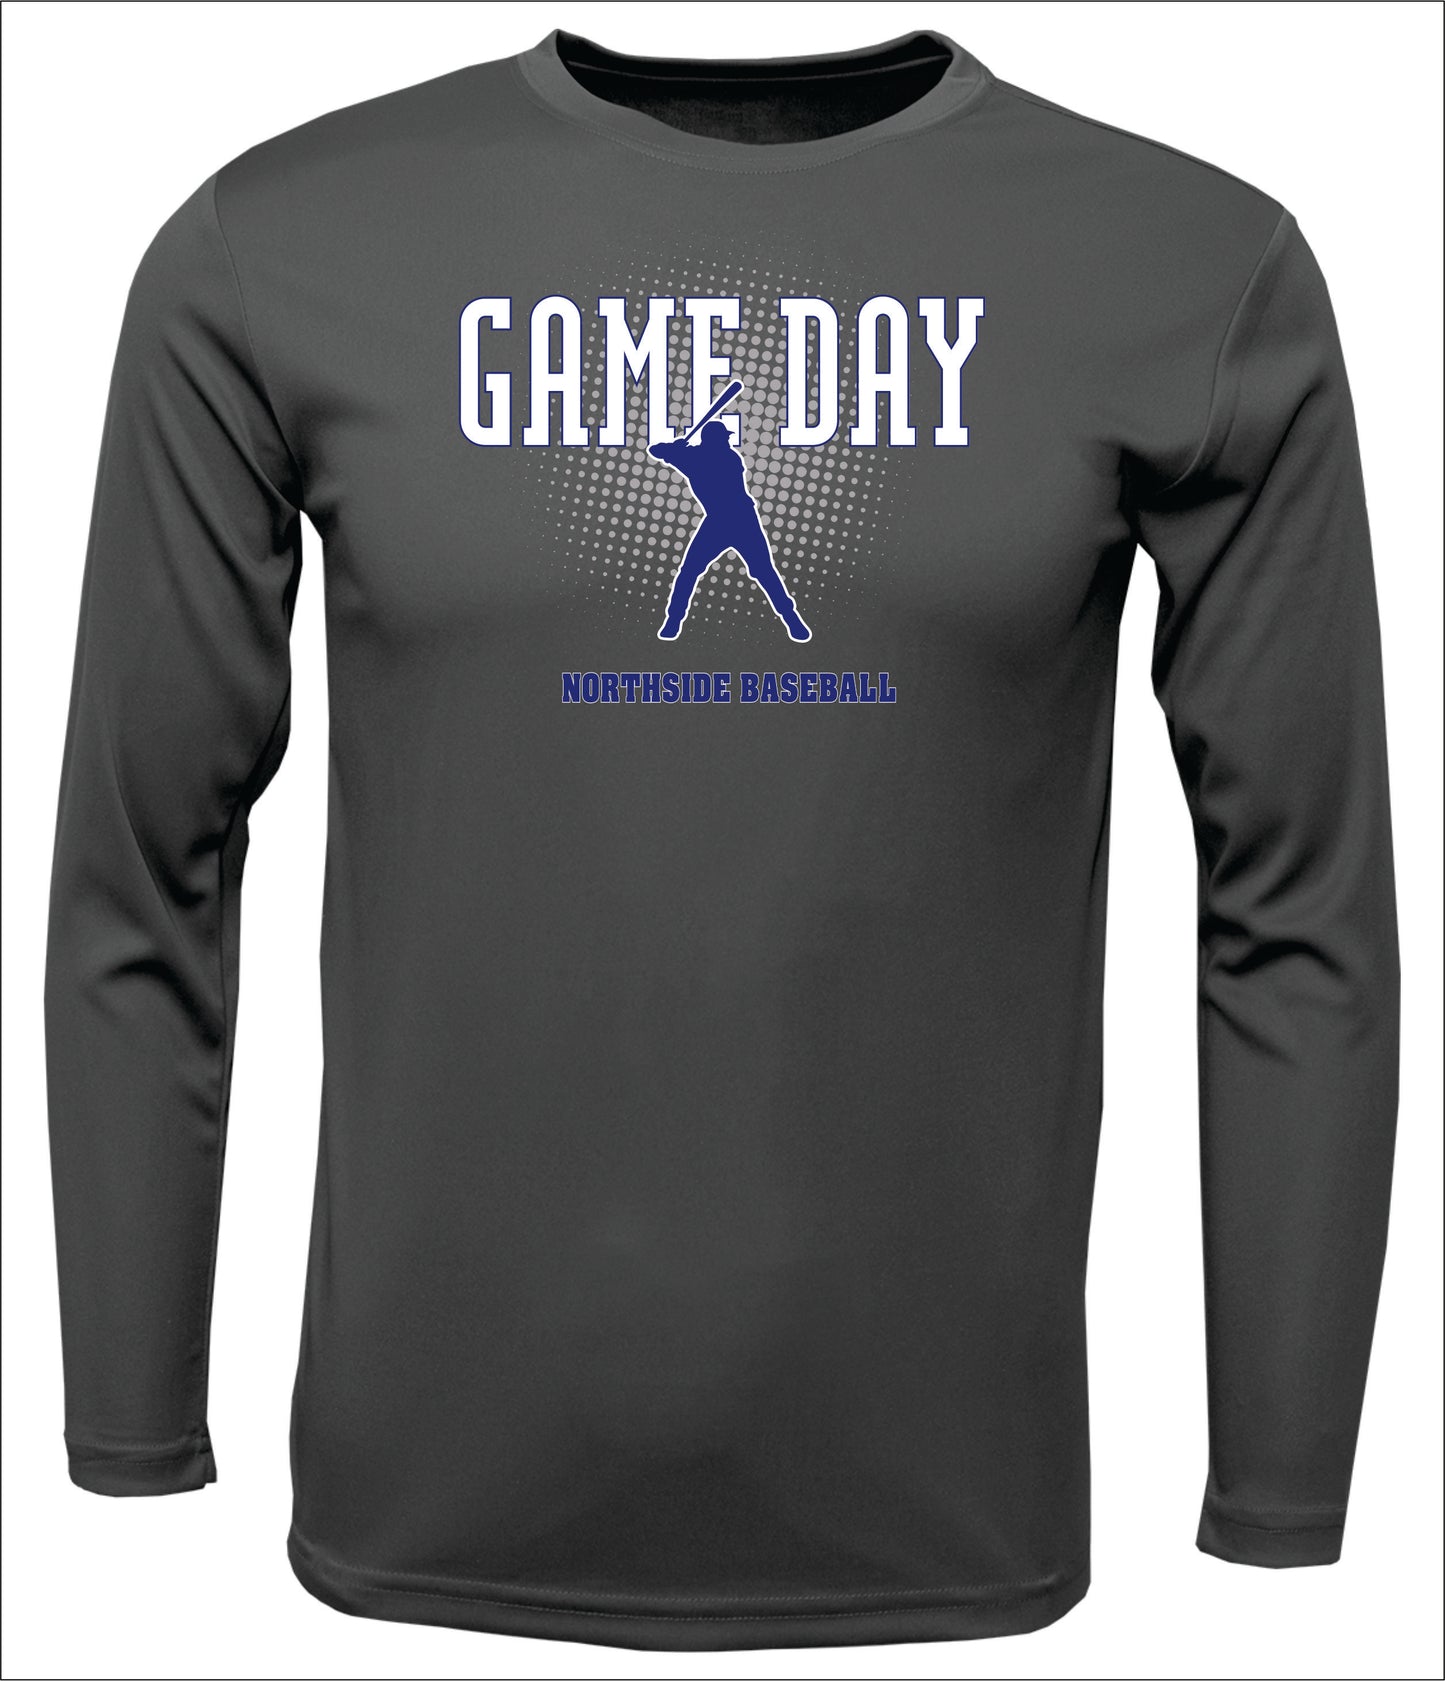 Northside "Game Day" Long-Sleeve Dri-Fit T-shirt